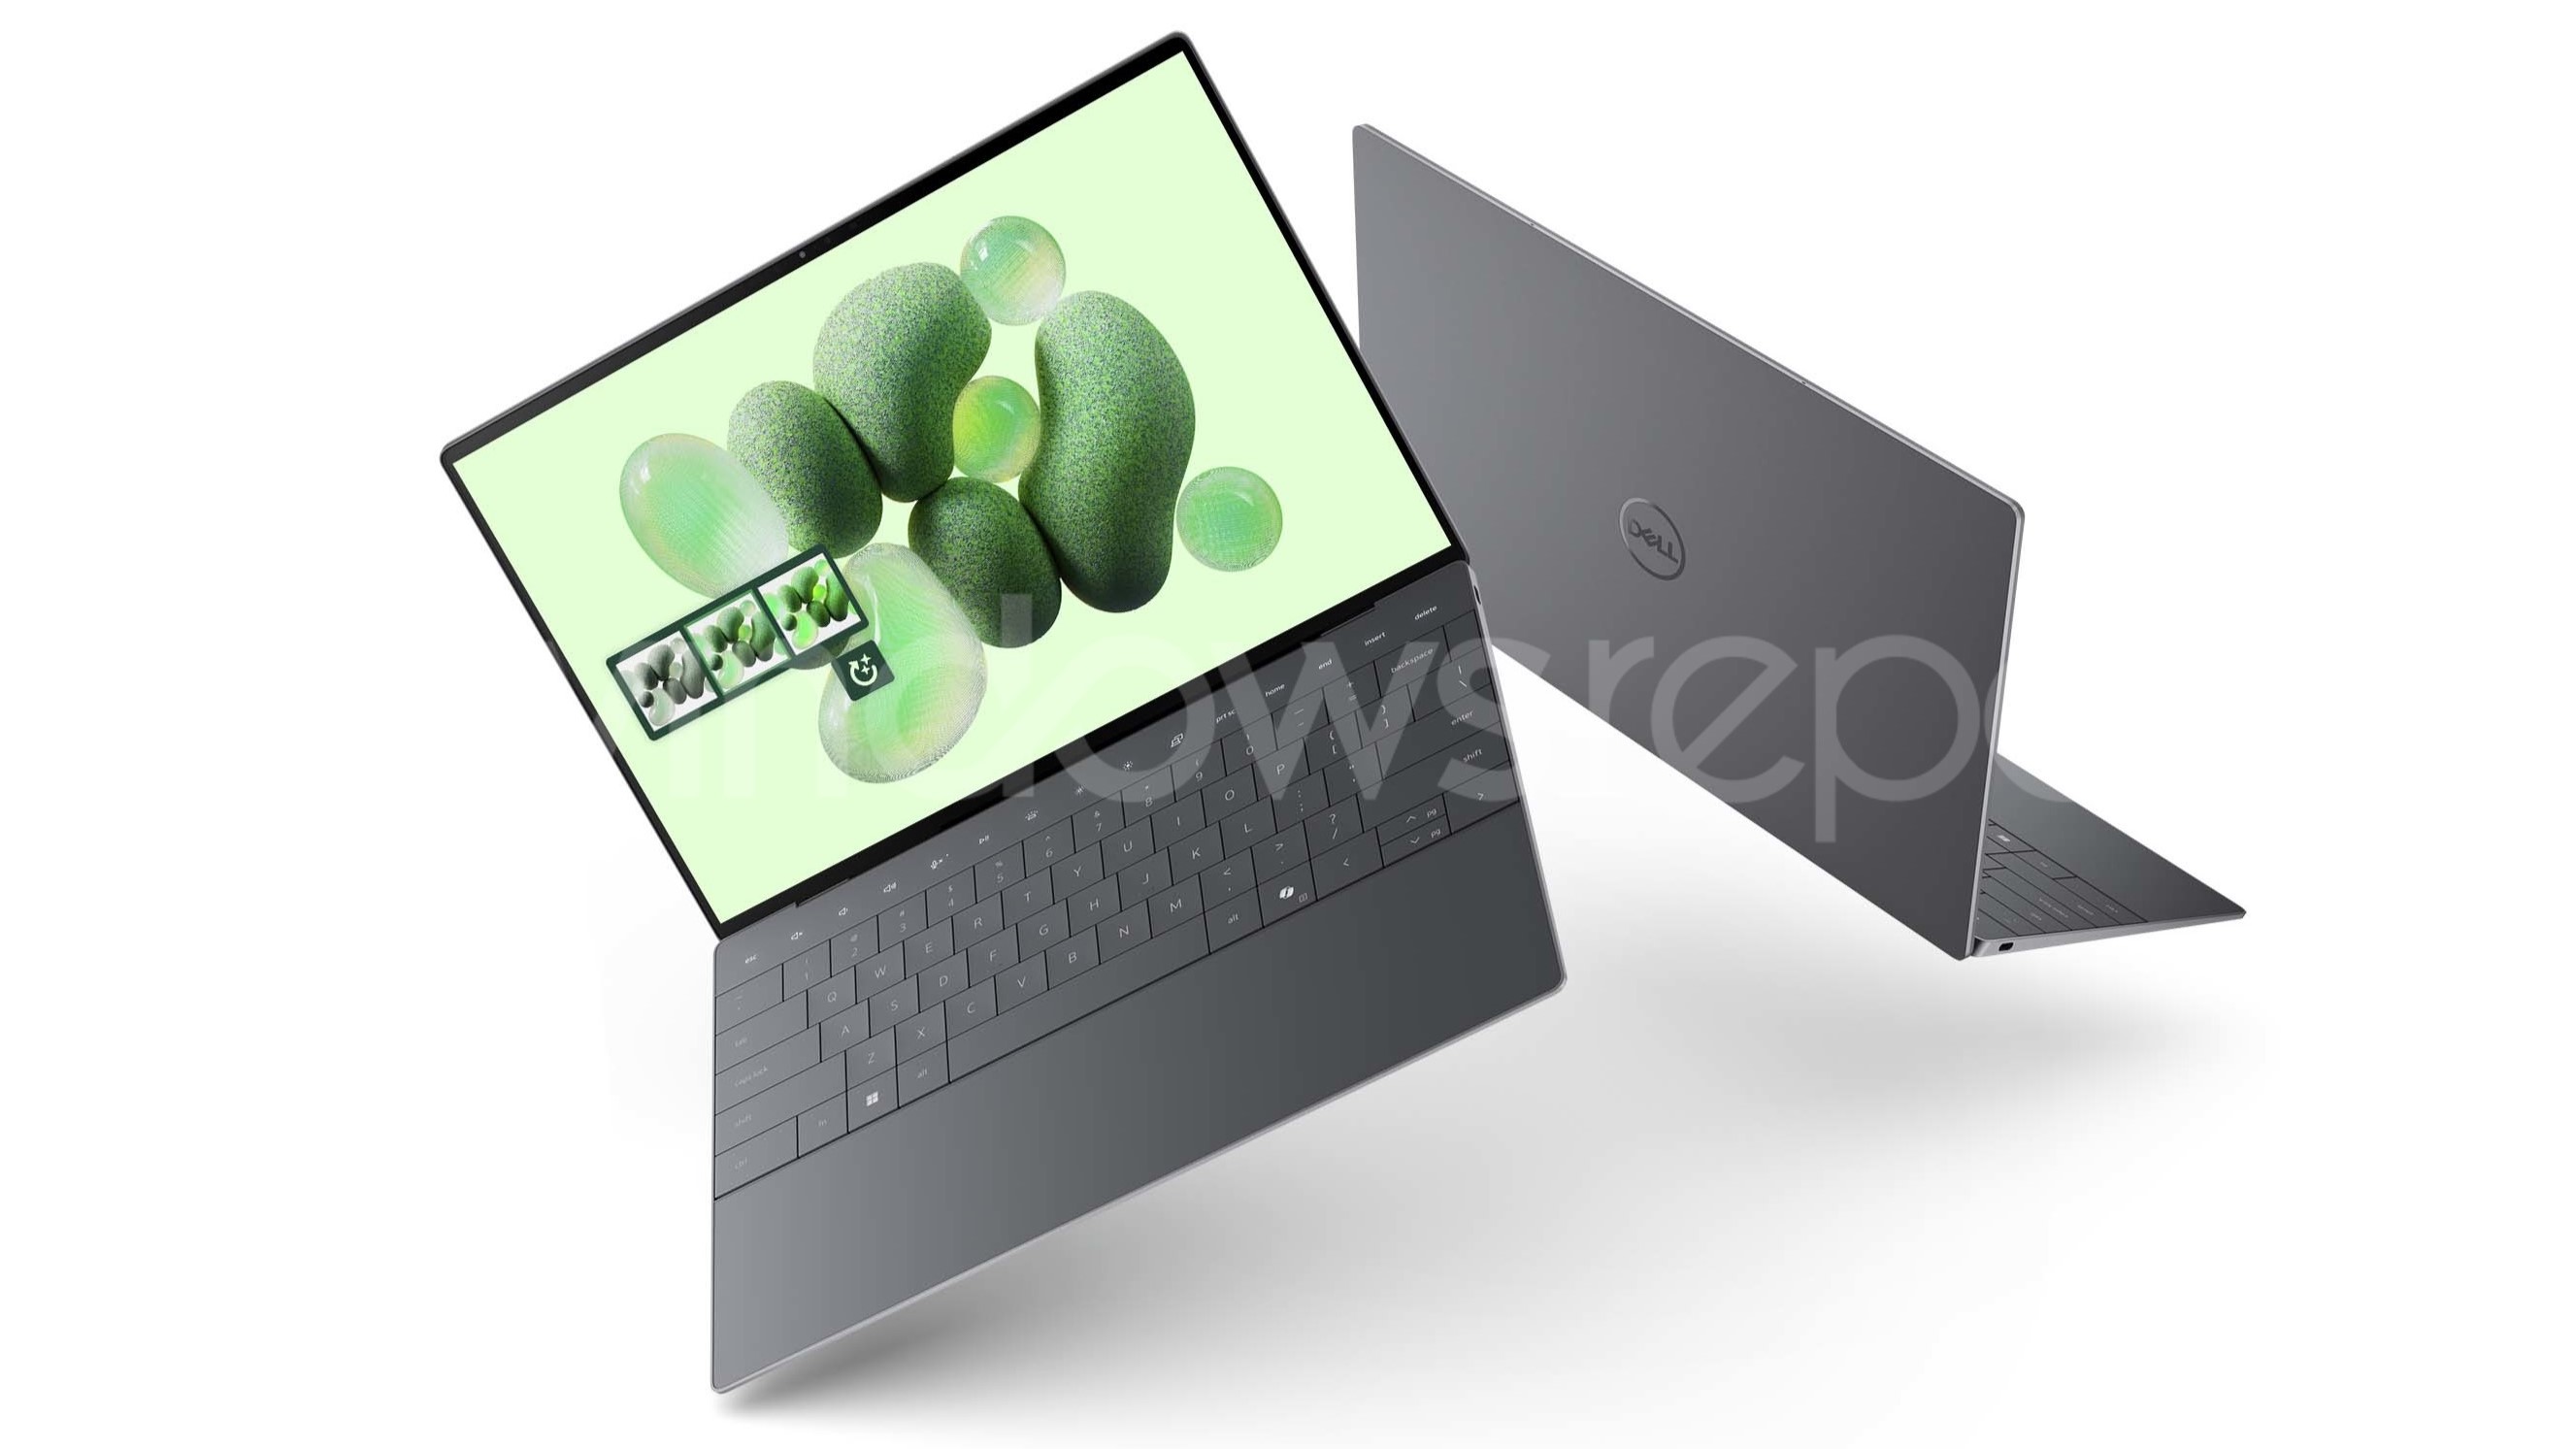 Dell's upcoming XPS with Arm